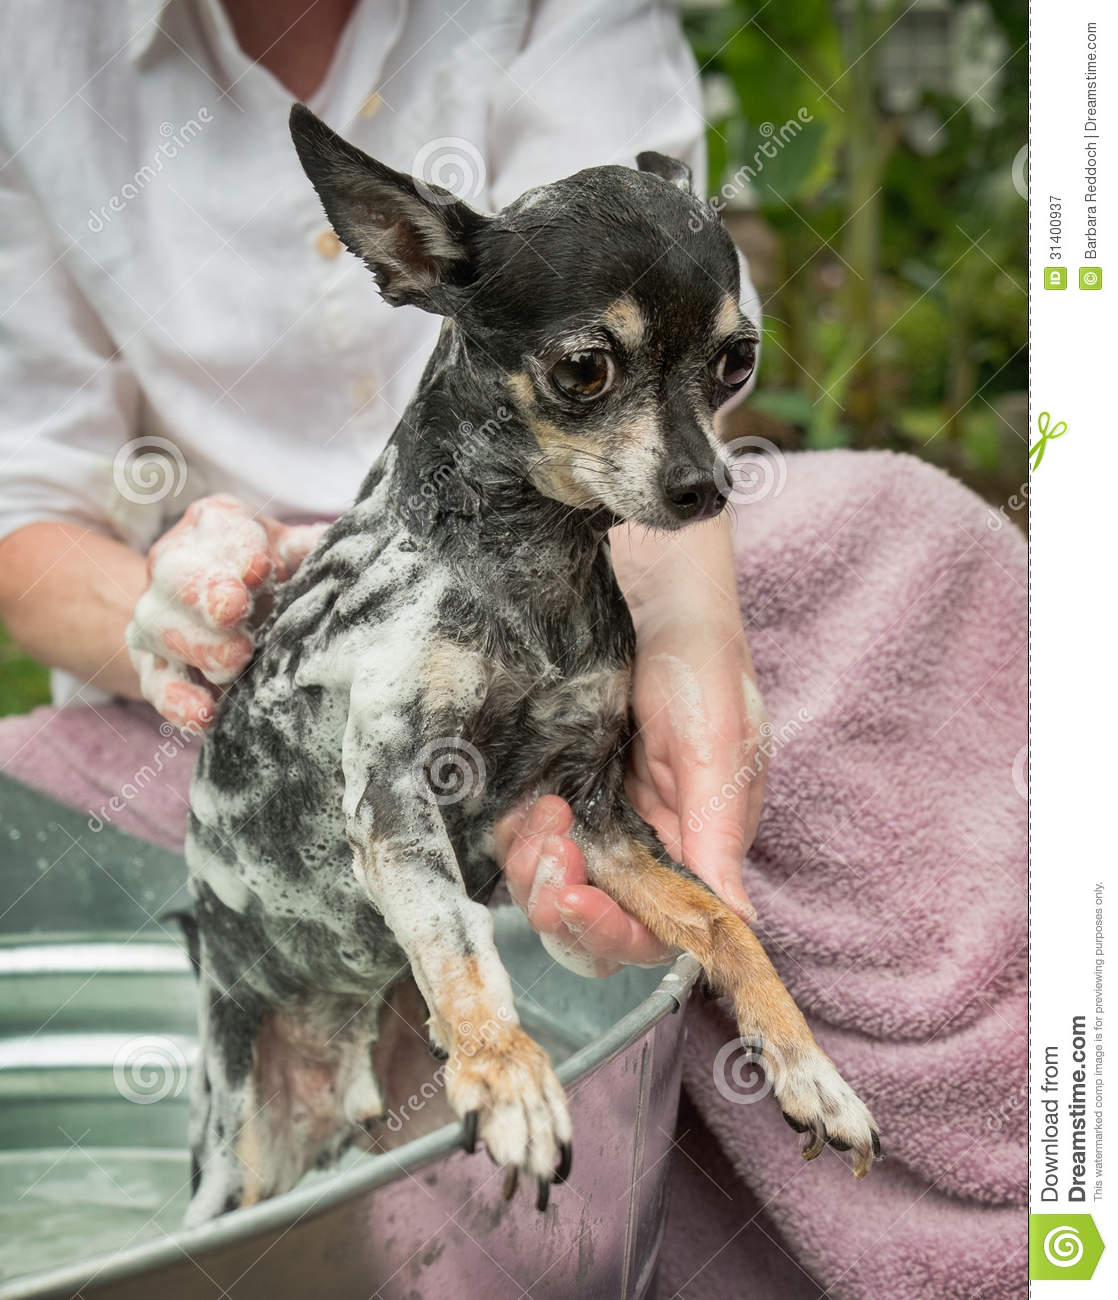 Cute Obedient Little Chihuahua Gets A Bath And Shampoo Royalty Free